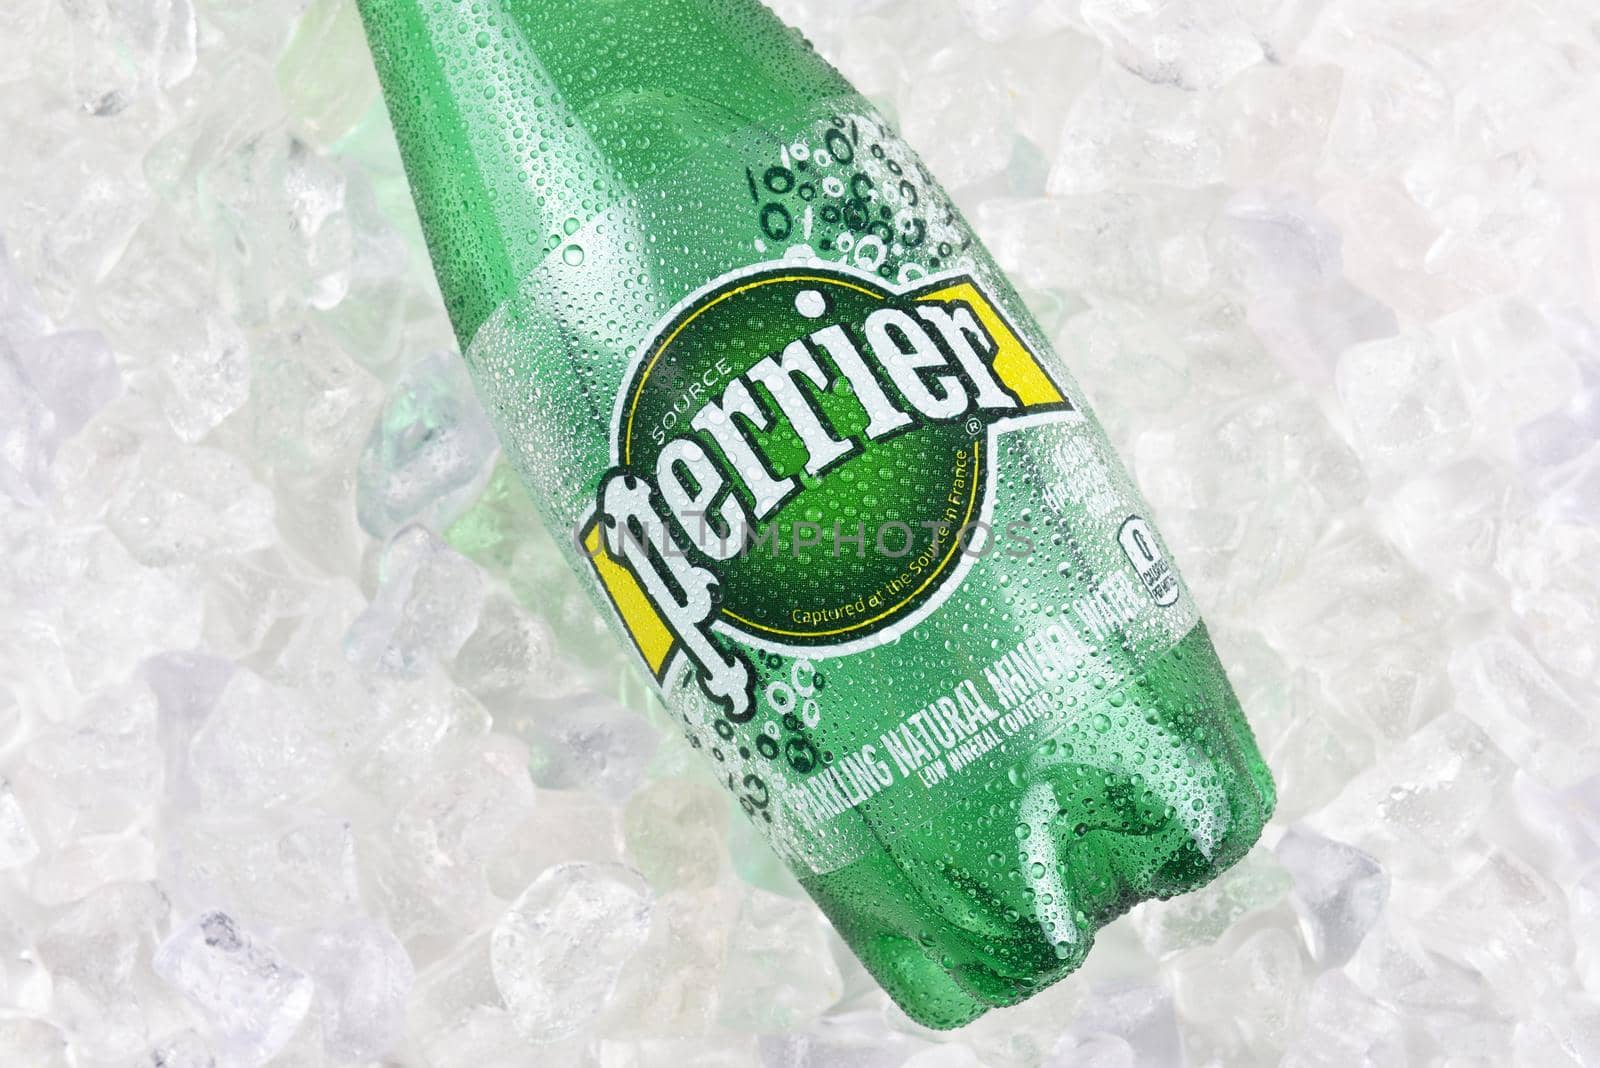 IRVINE, CALIFORNIA - DECEMBER 17, 2017: Perrier Sparkling Mineral Water on ice closeup. The spring, in Vergeze, France, where the water is sourced is naturally carbonated.